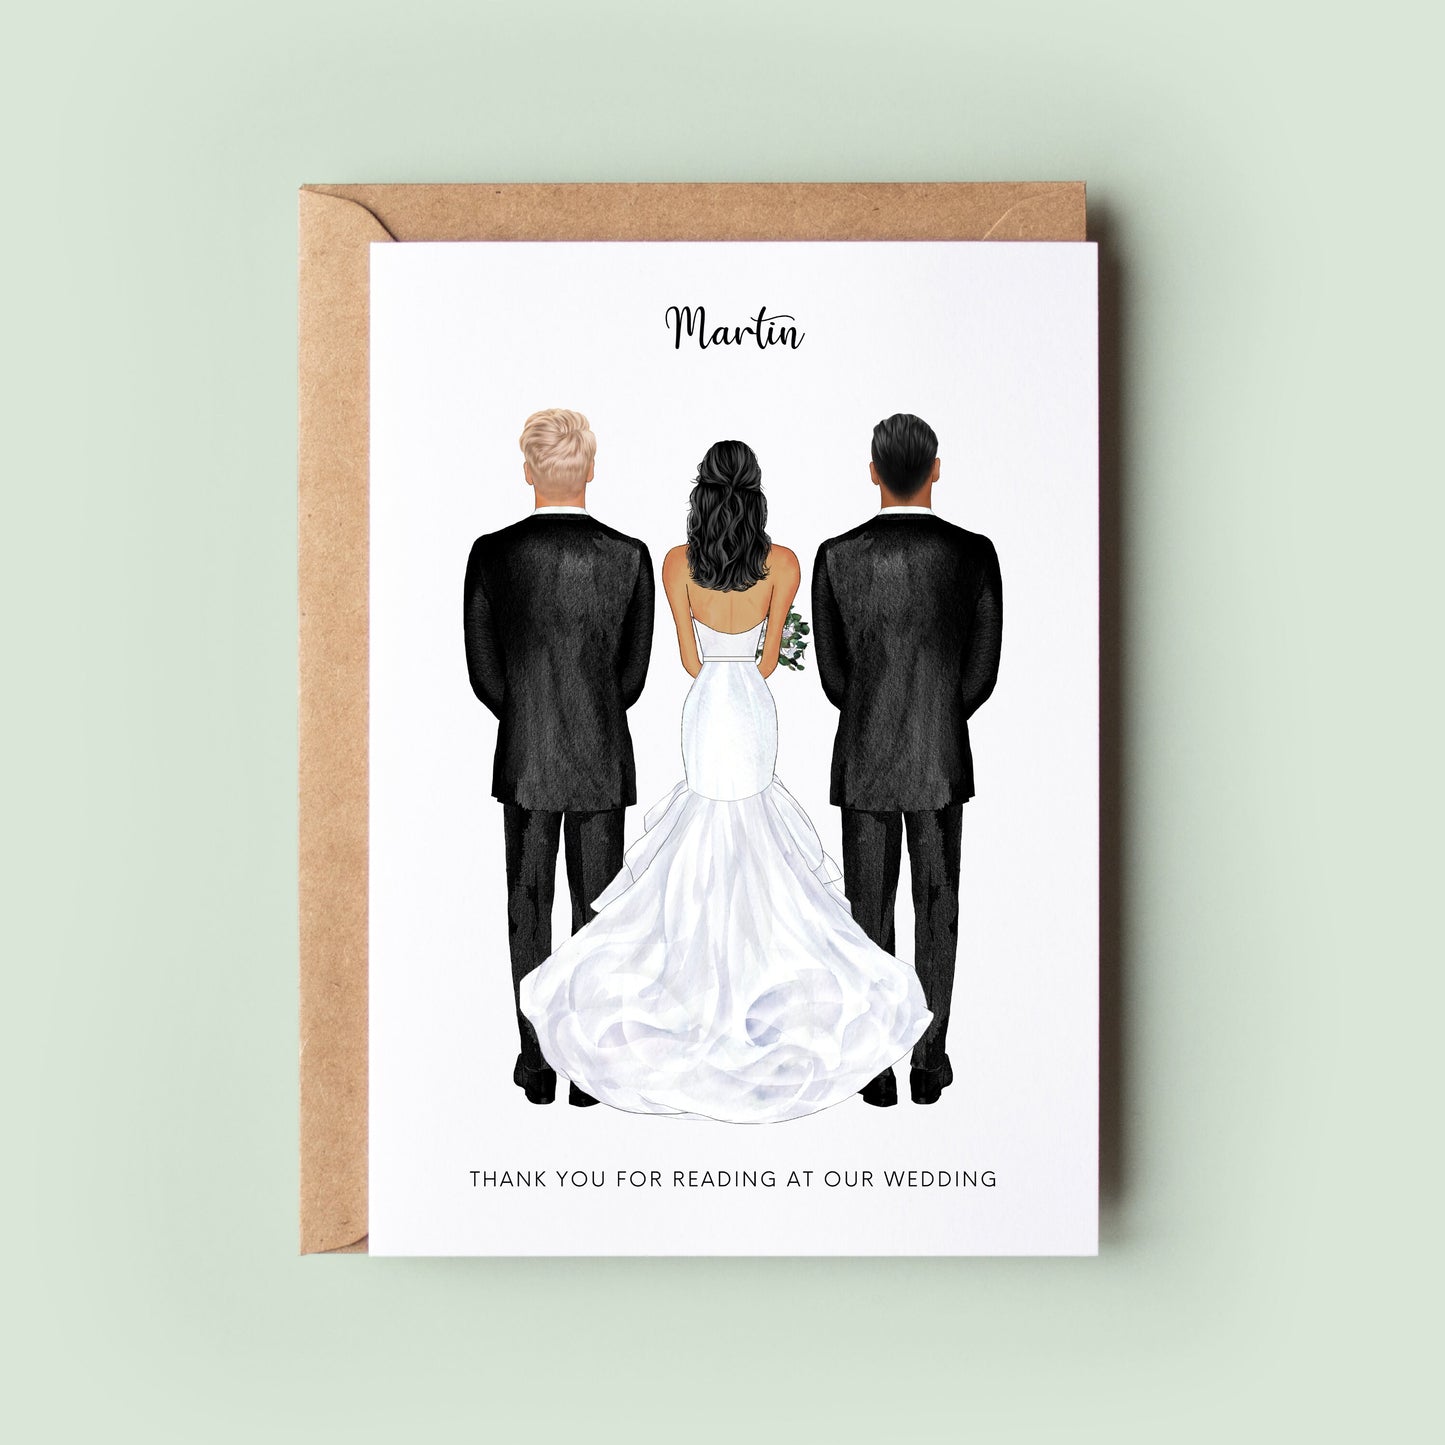 Personalised Thank You For Reading At Our Wedding Card, Wedding Thank You Card, Personalised Wedding Reader Card, Wedding Reading Card